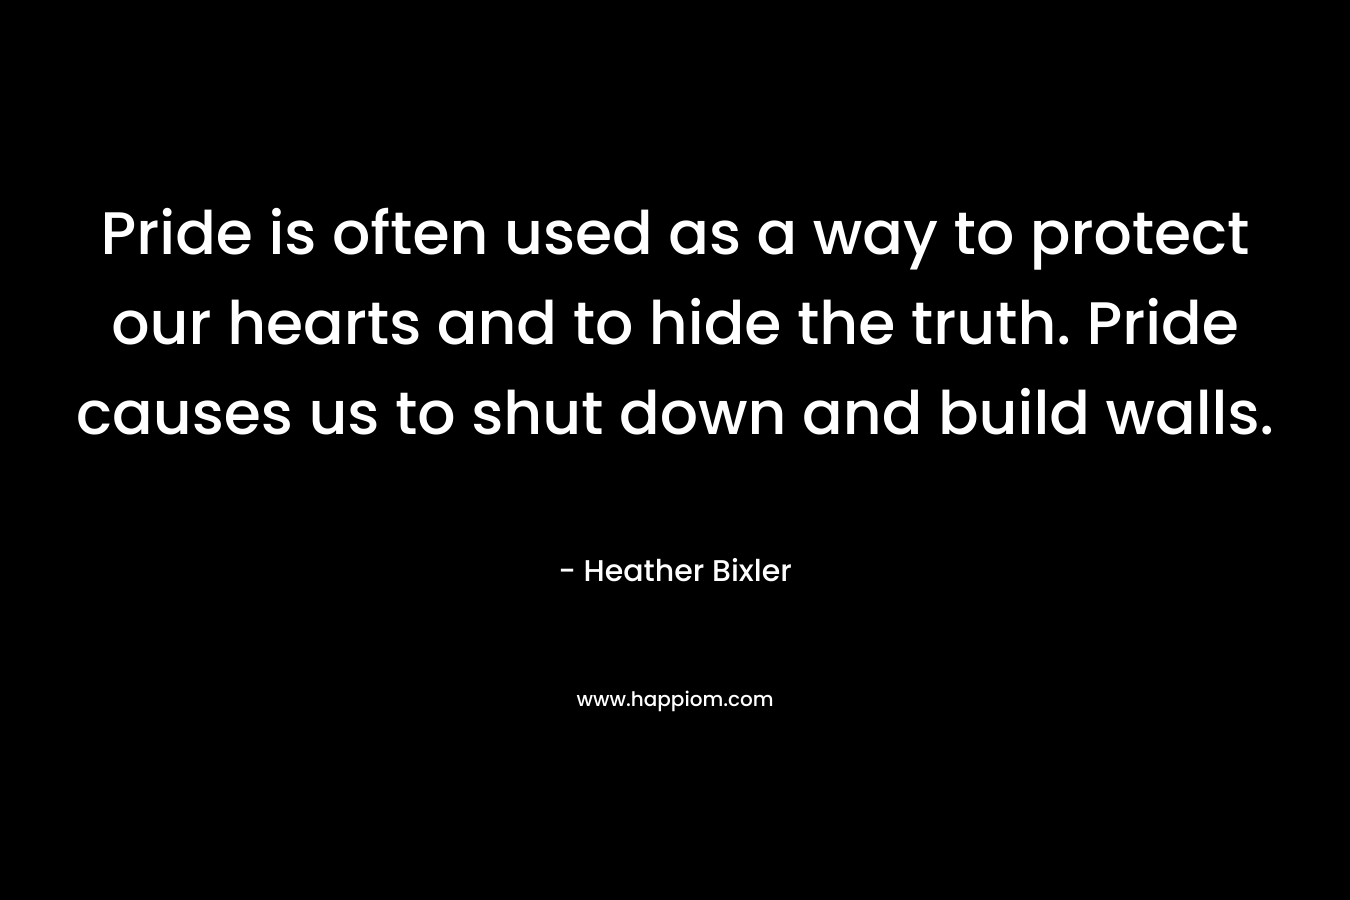 Pride is often used as a way to protect our hearts and to hide the truth. Pride causes us to shut down and build walls. – Heather Bixler